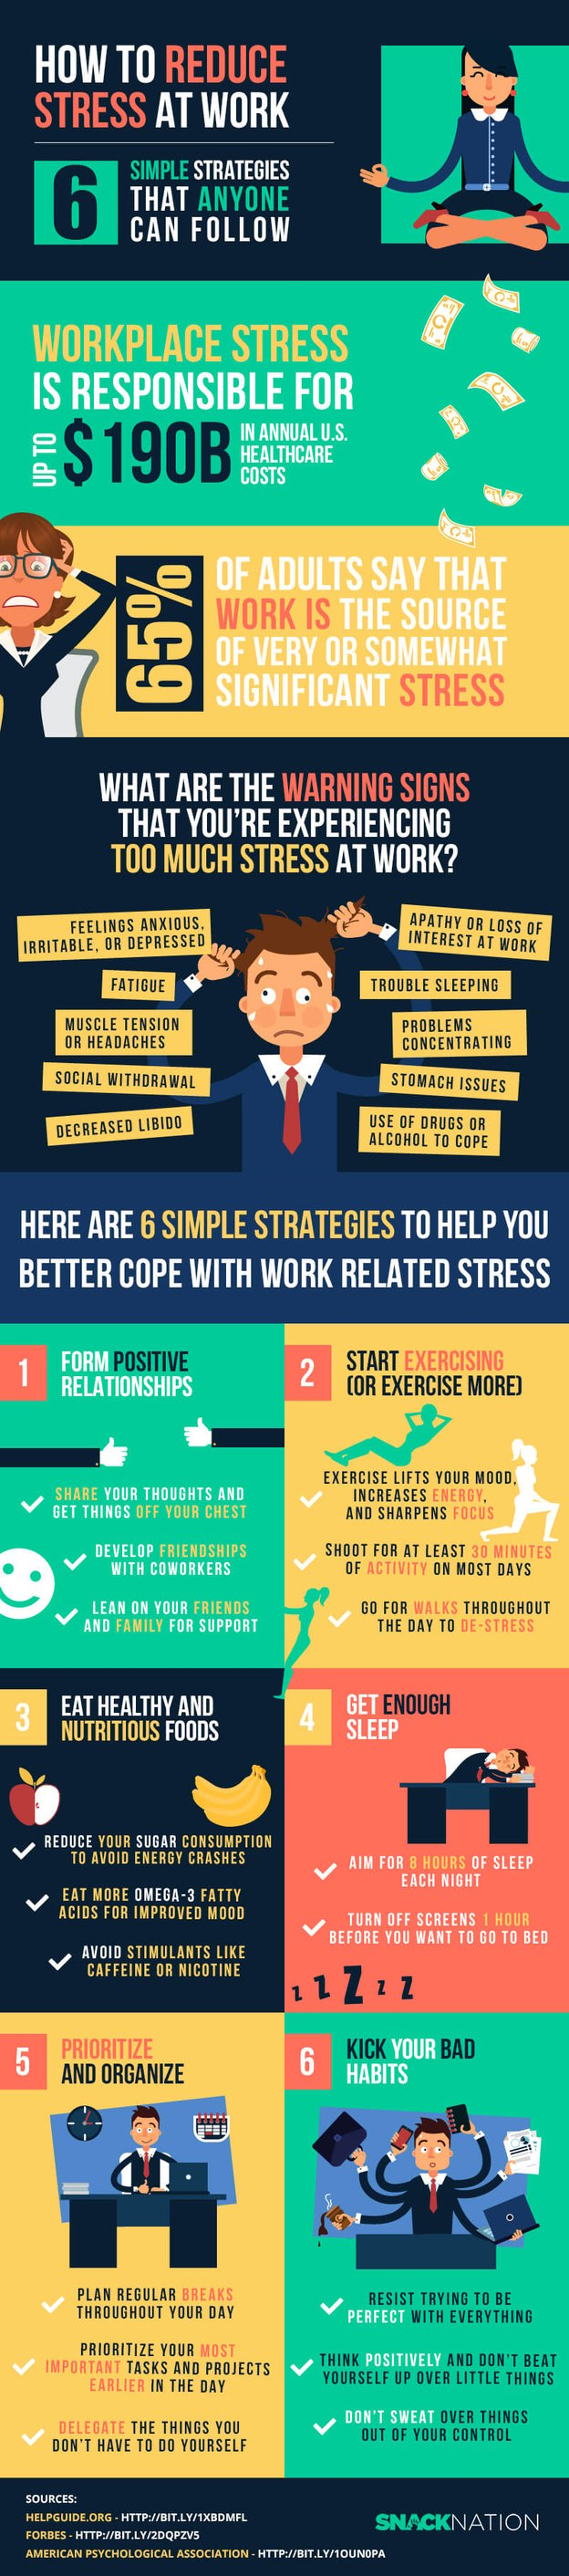 How to reduce work stress - infographic